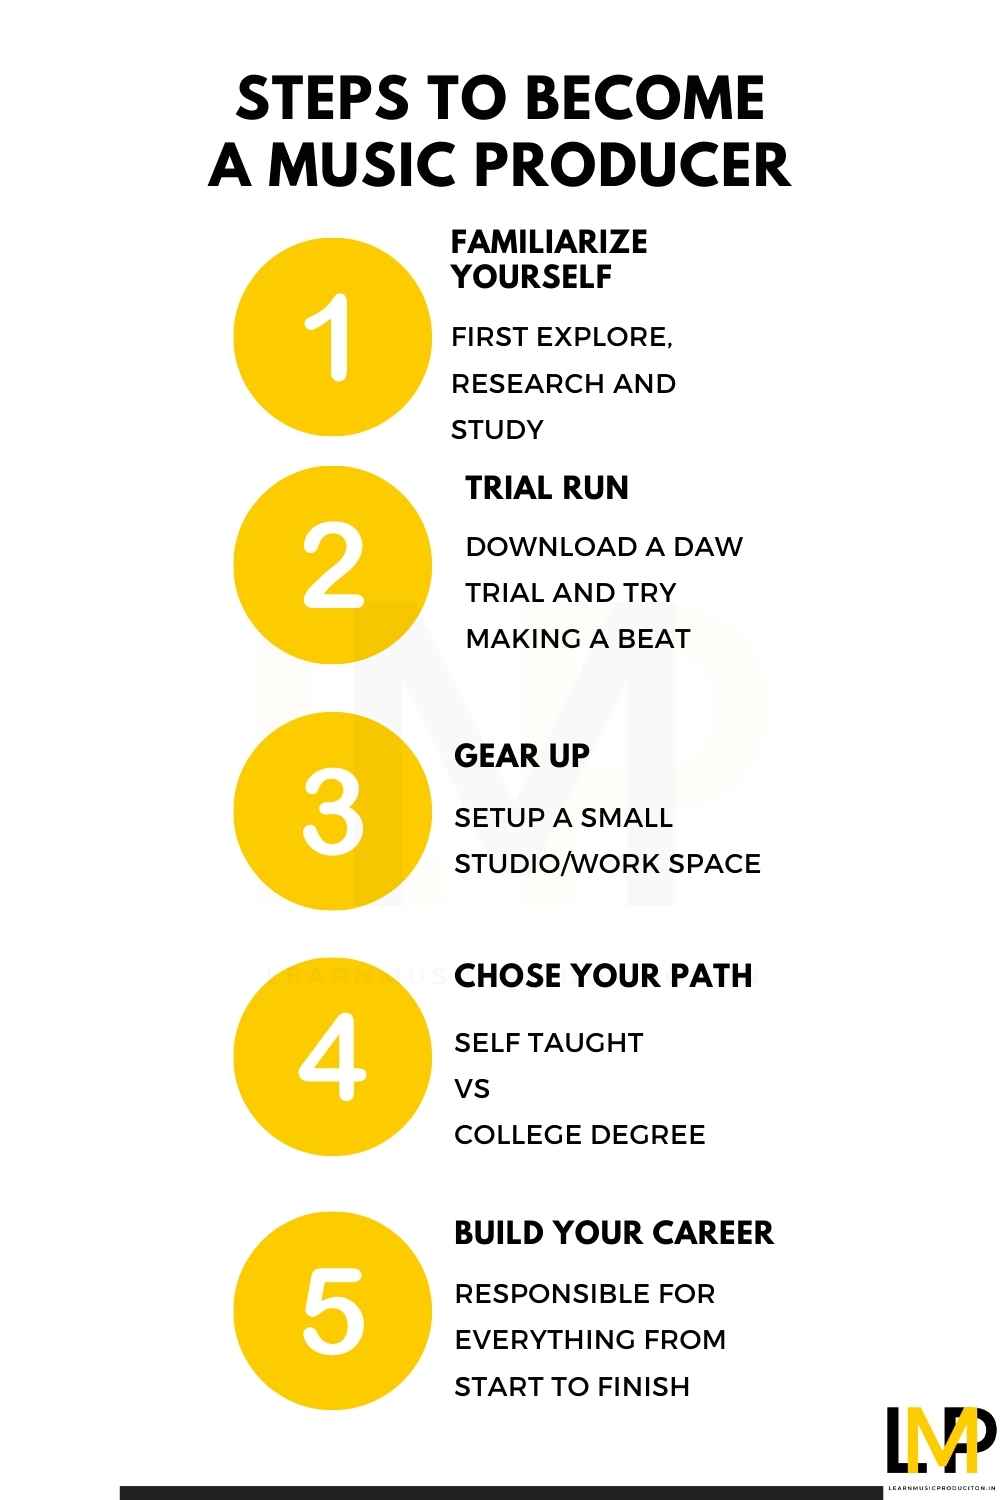 Steps To Become A Music Producer - Info-graphic